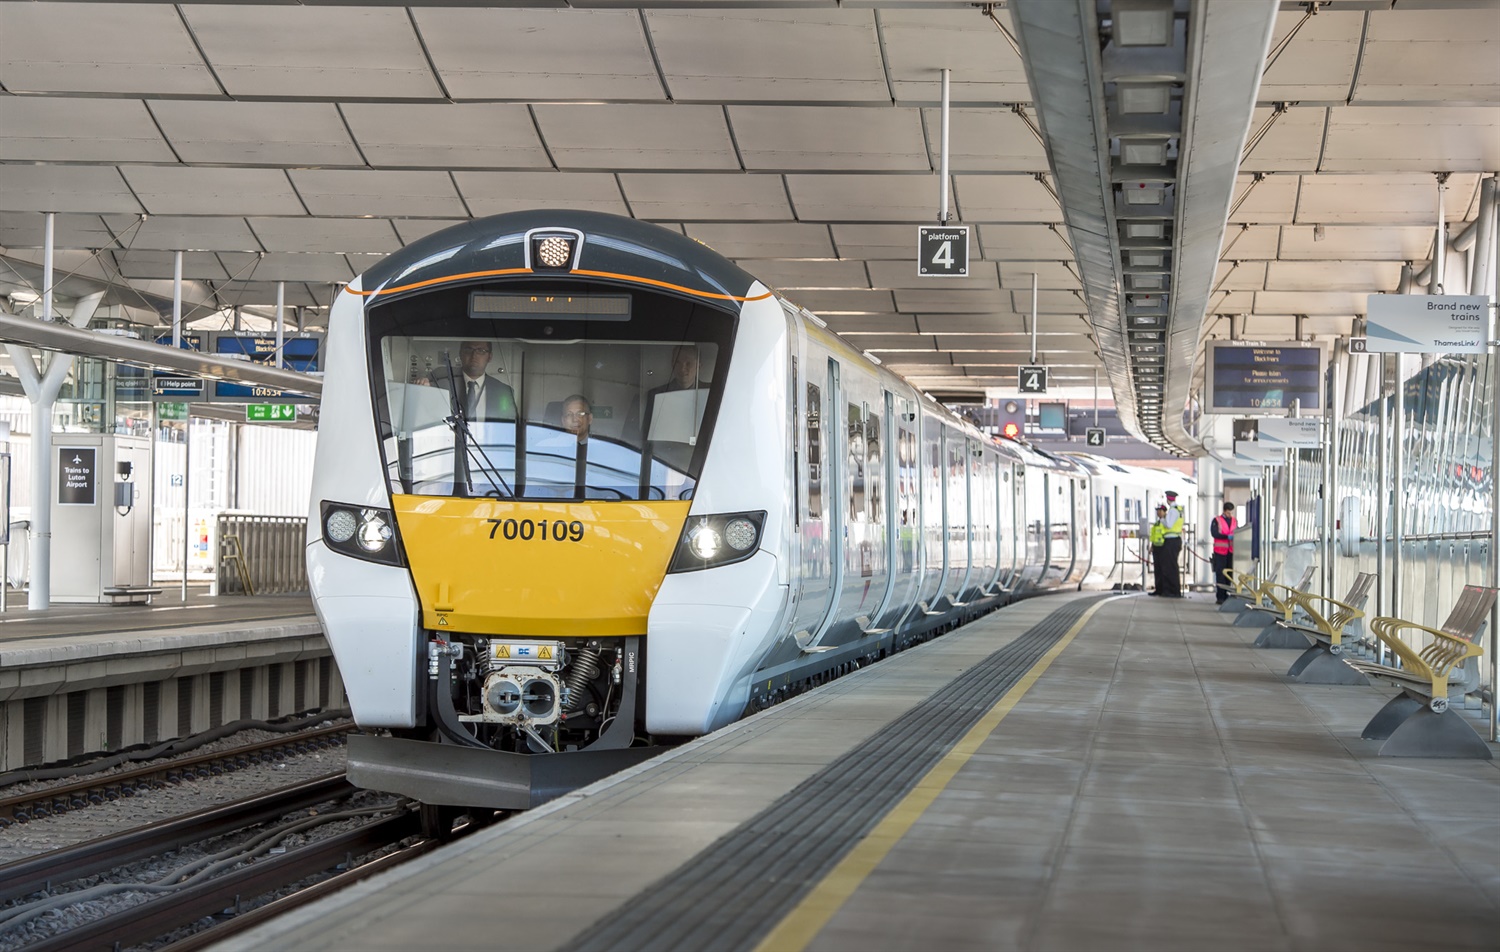 Jobs and skills boost in London – courtesy of Thameslink